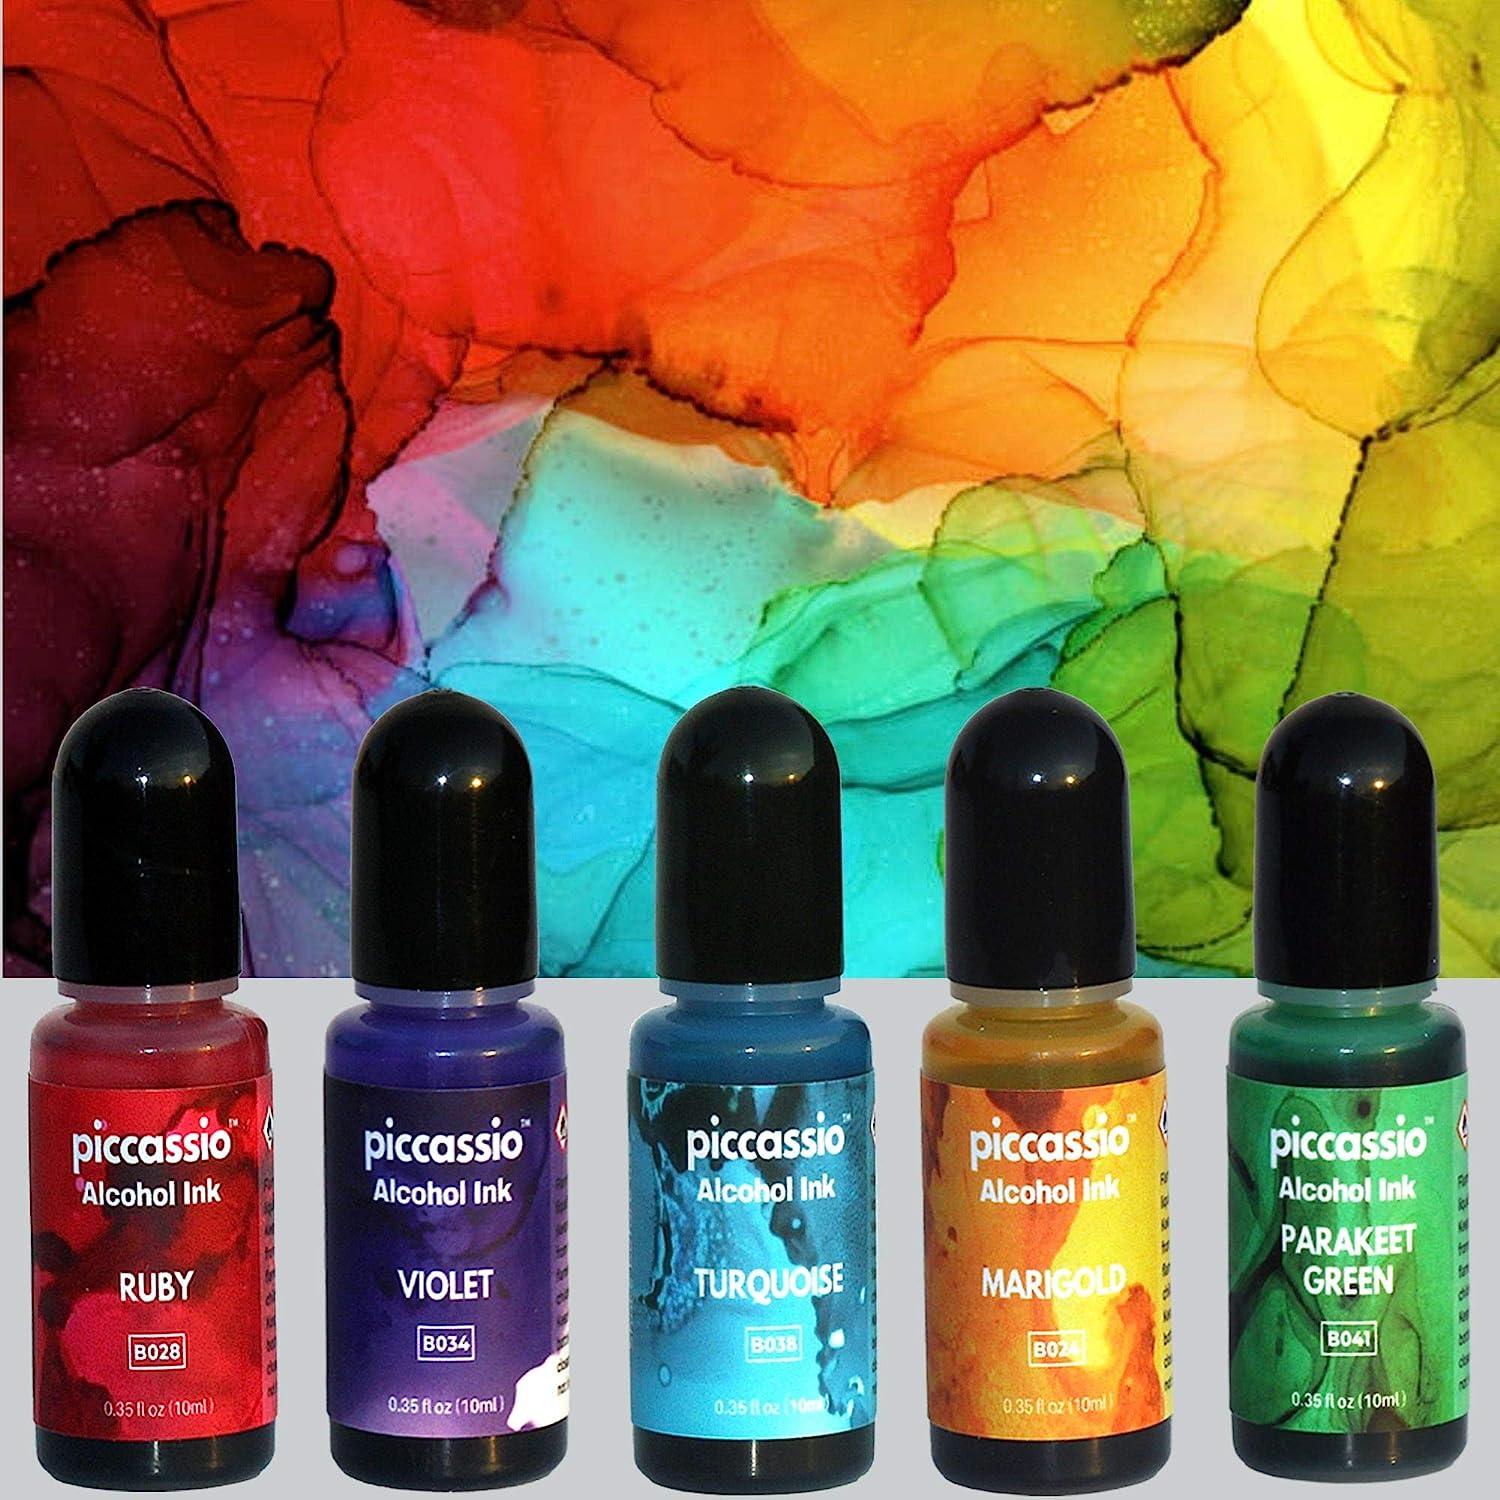 Piccassio Alcohol Ink Set - 20 Vibrant Alcohol Inks - Acid-Free,Fast-Drying and Permanent Inks-Versatile Alcohol Ink for Epoxy Resin, Fluid Art